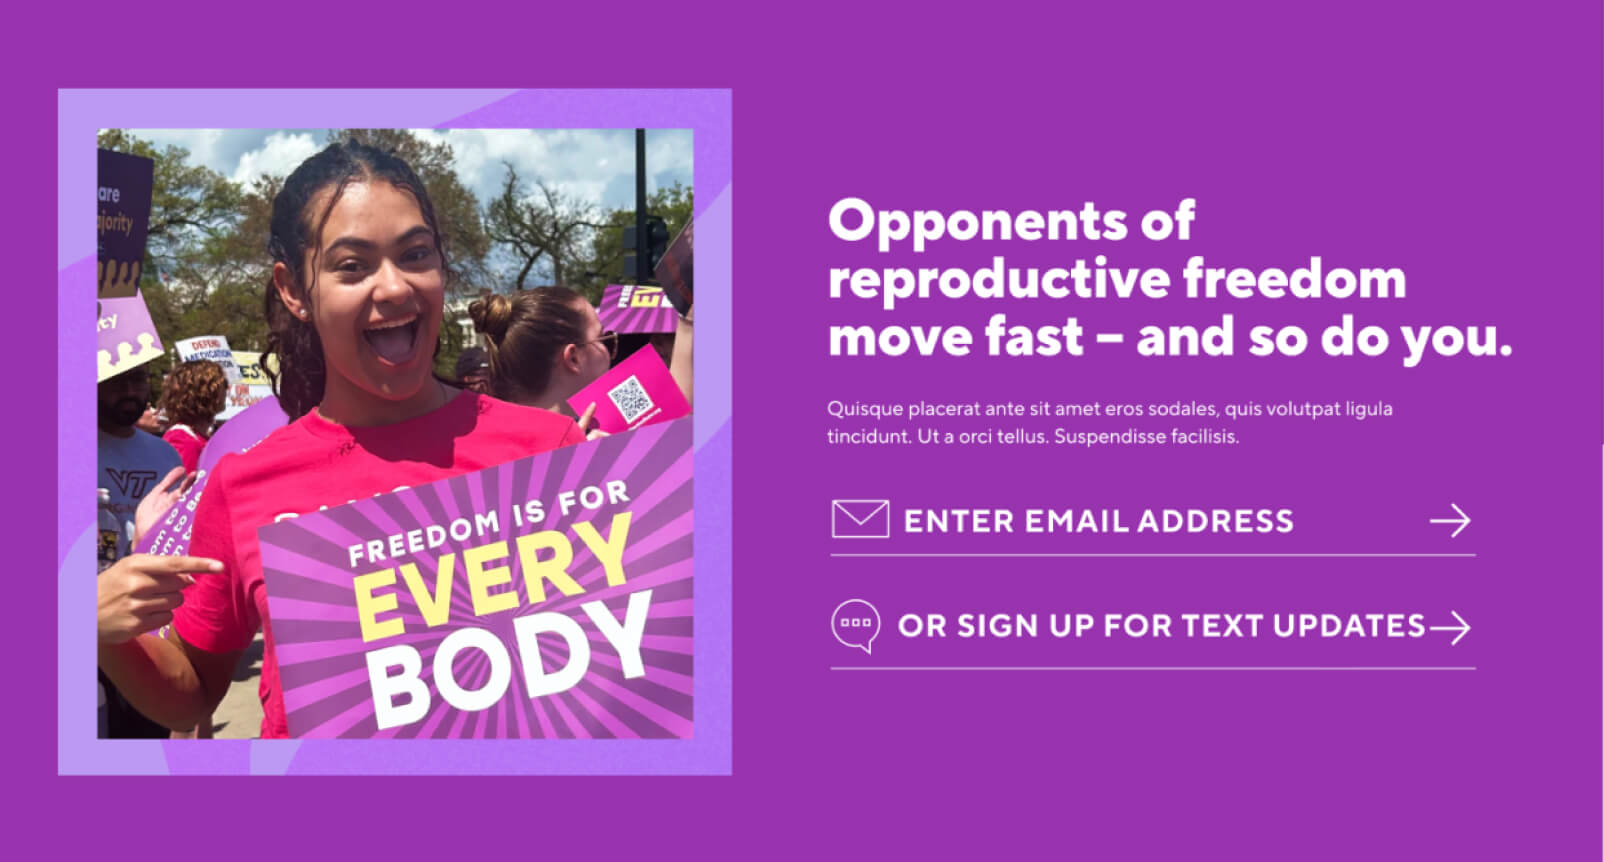 A photo of a young woman with a reproductive freedom rally sign, next to a newsletter signup box.